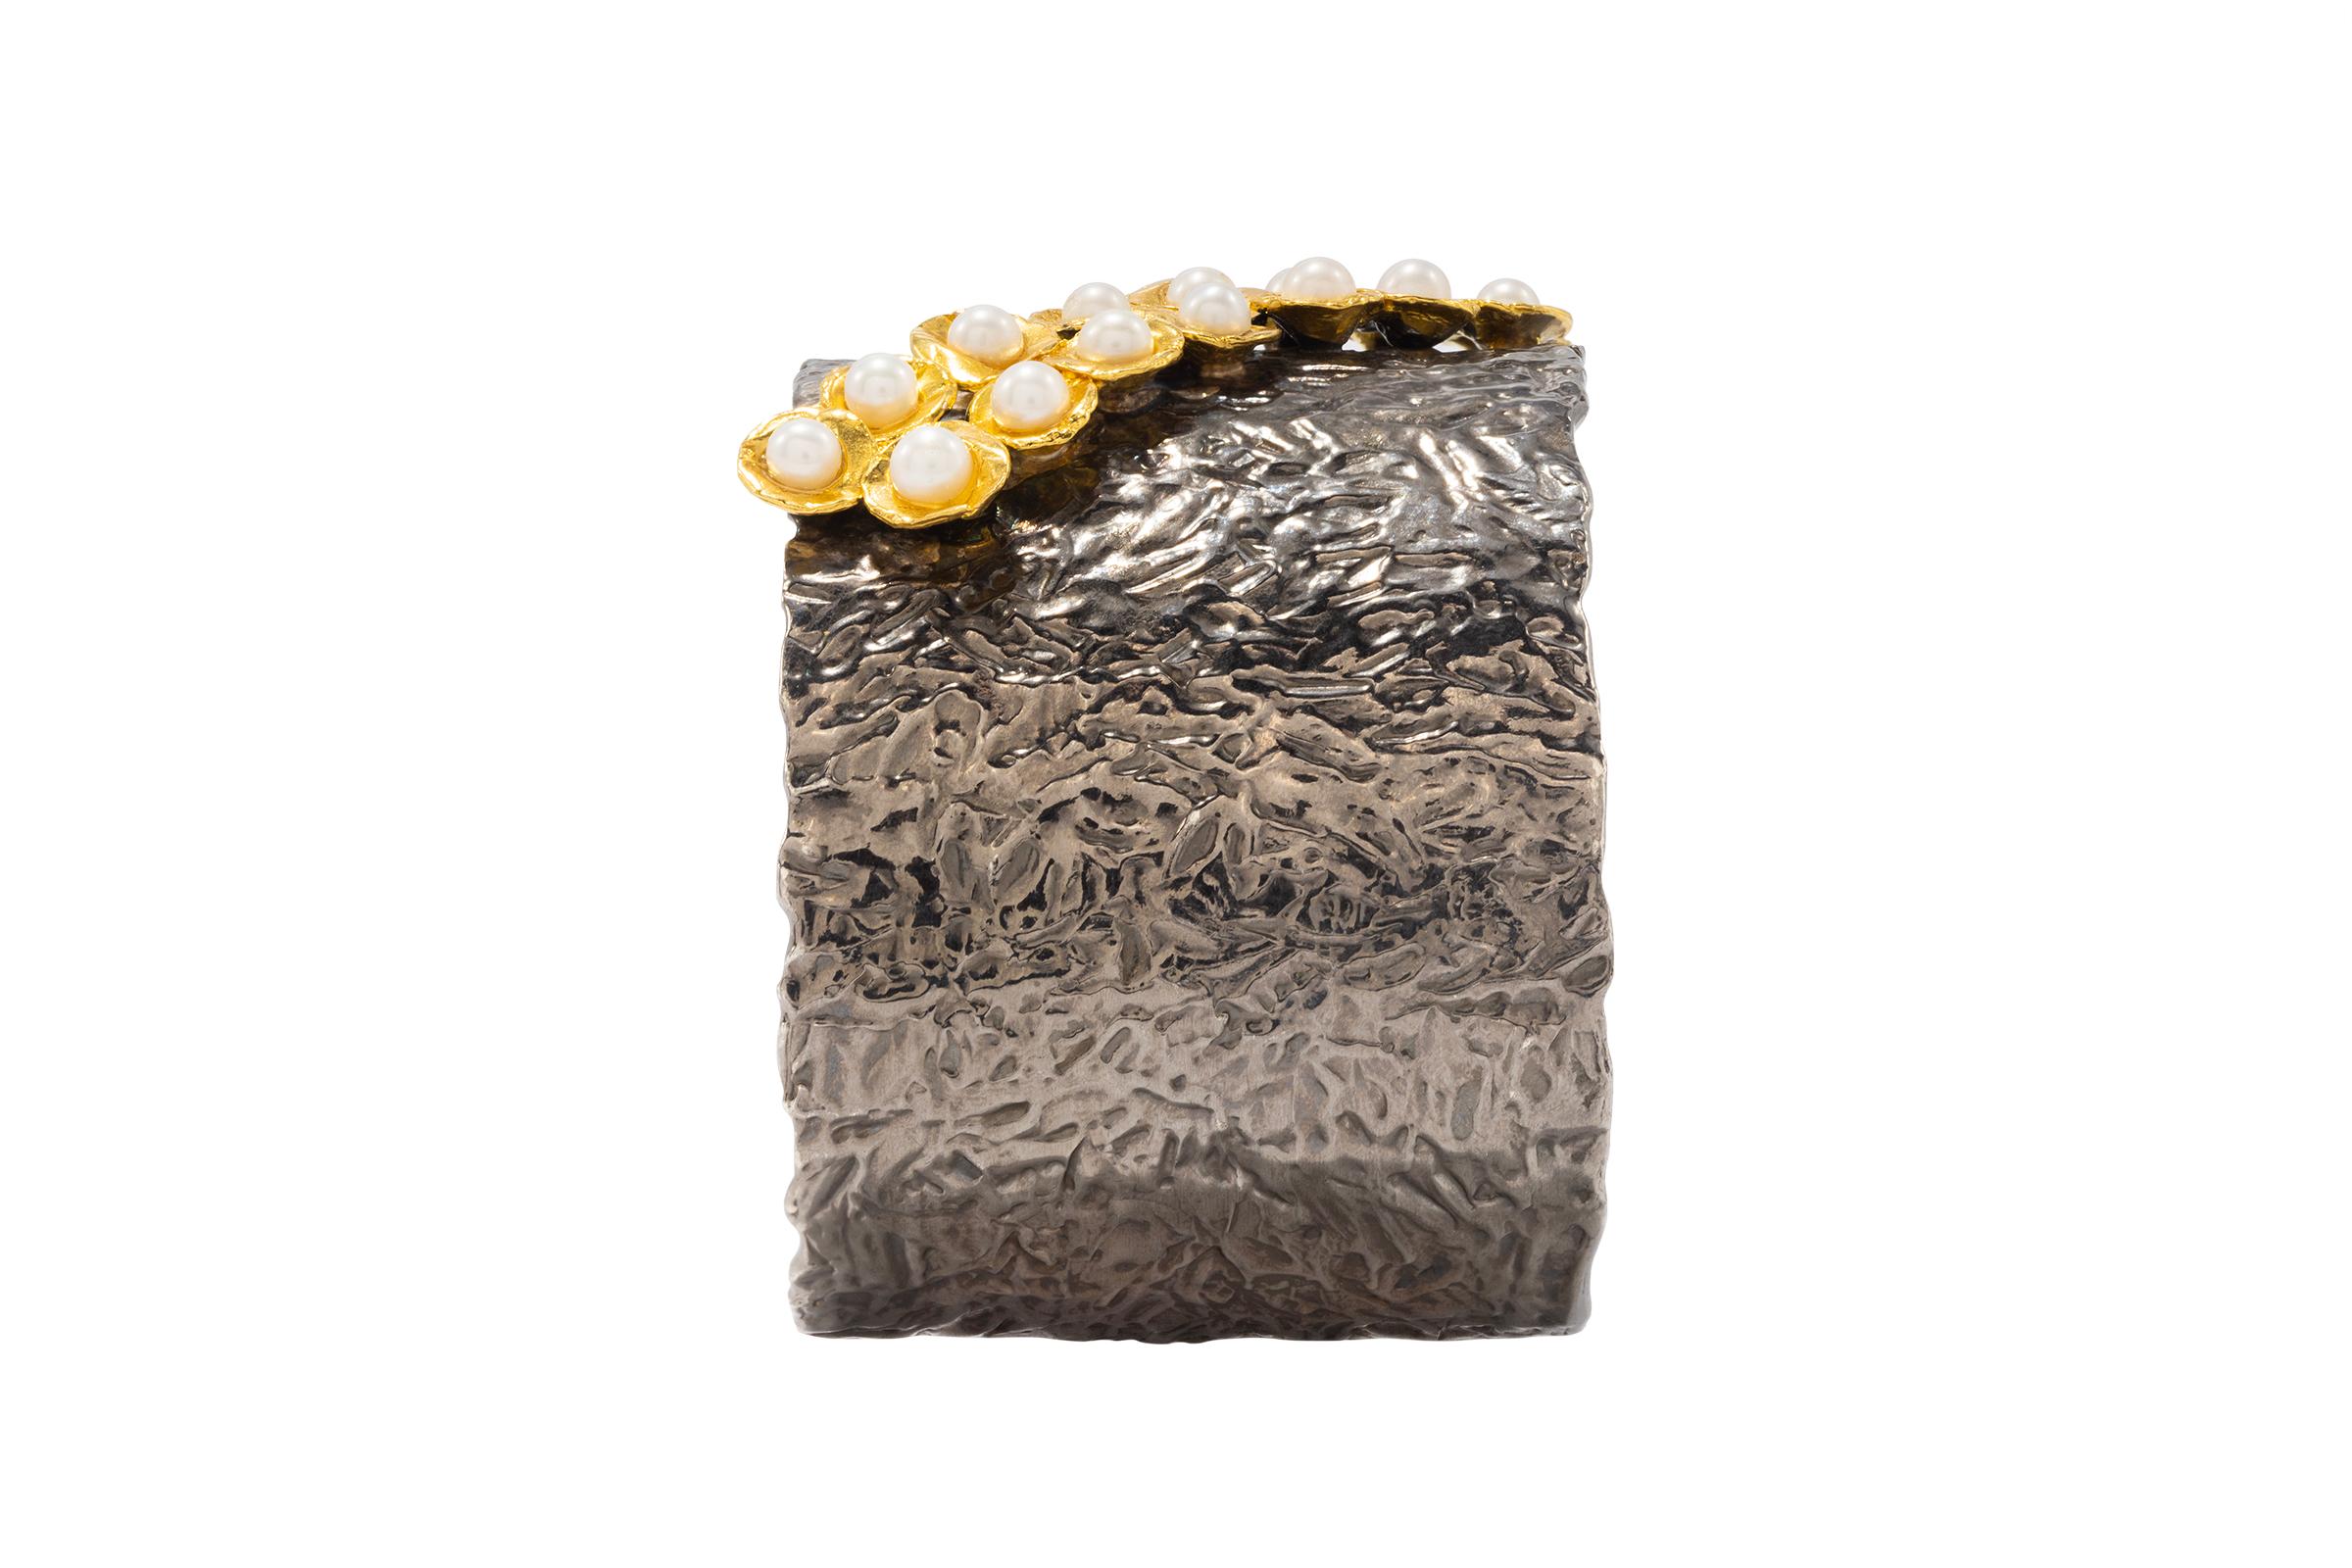 Artisan Rhodium Plated Cuff with 22k Gold & Pearls For Sale